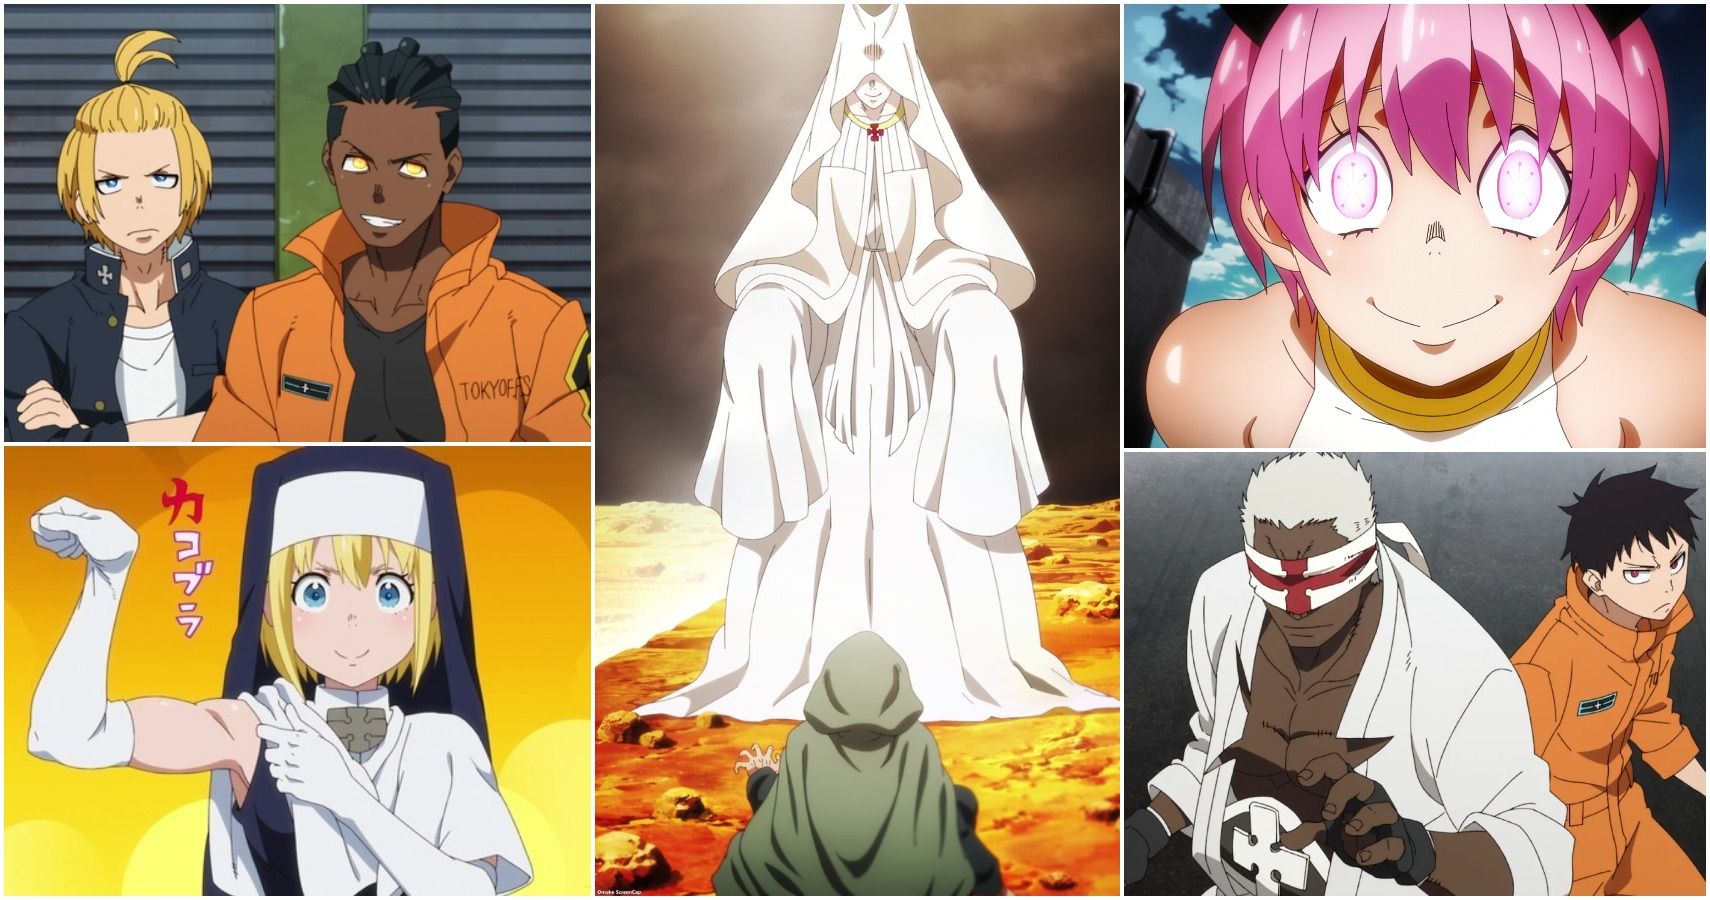 10 most powerful characters from the Fire Force manga, ranked